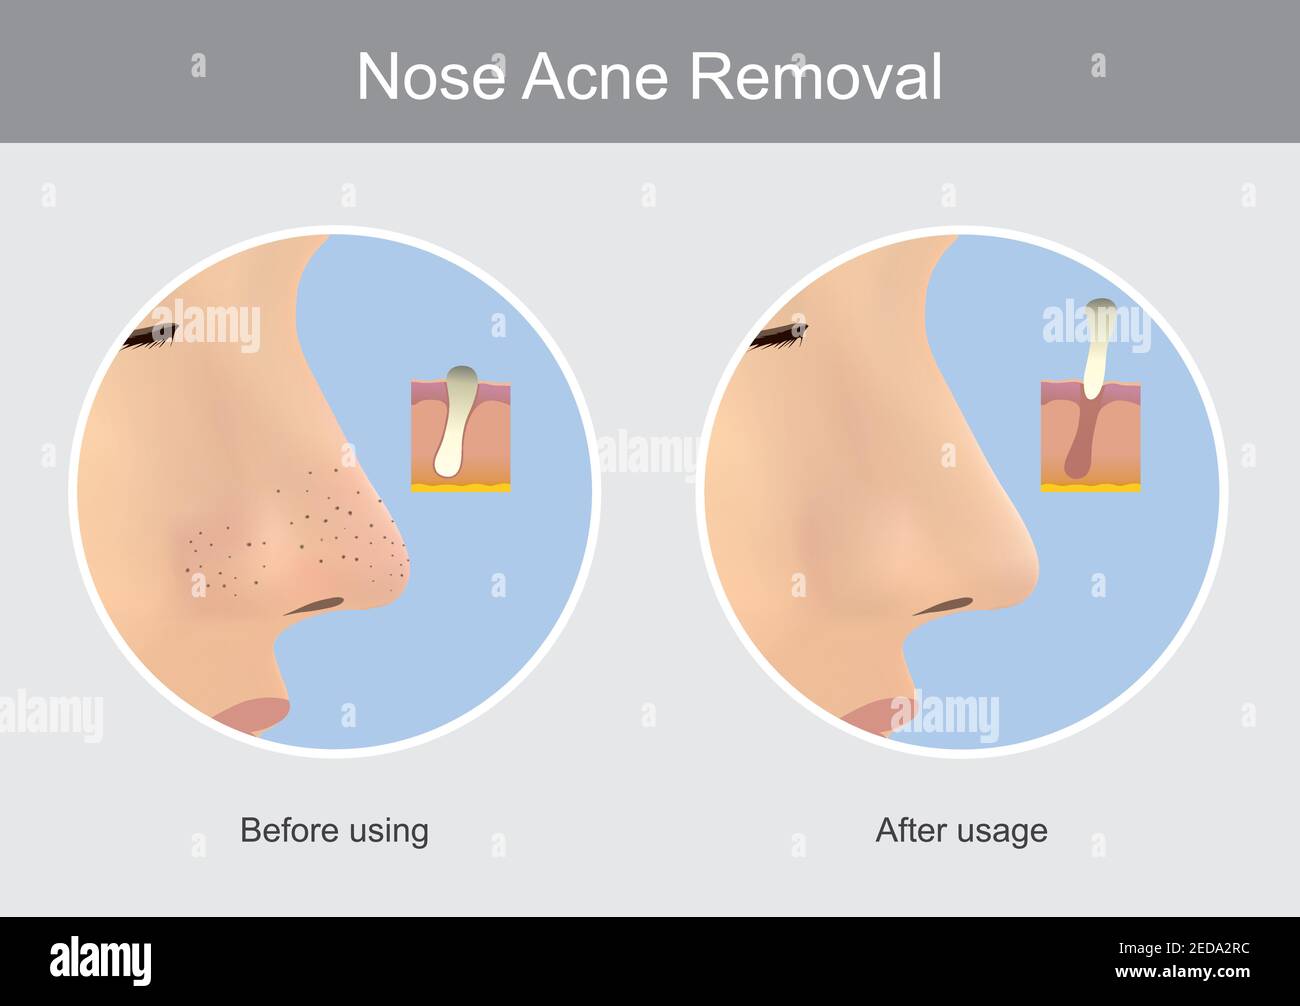 Nose Acne Removal. Illustration show human skin in case before using and after usage a products for the nose acne (blackhead) remover. Stock Vector